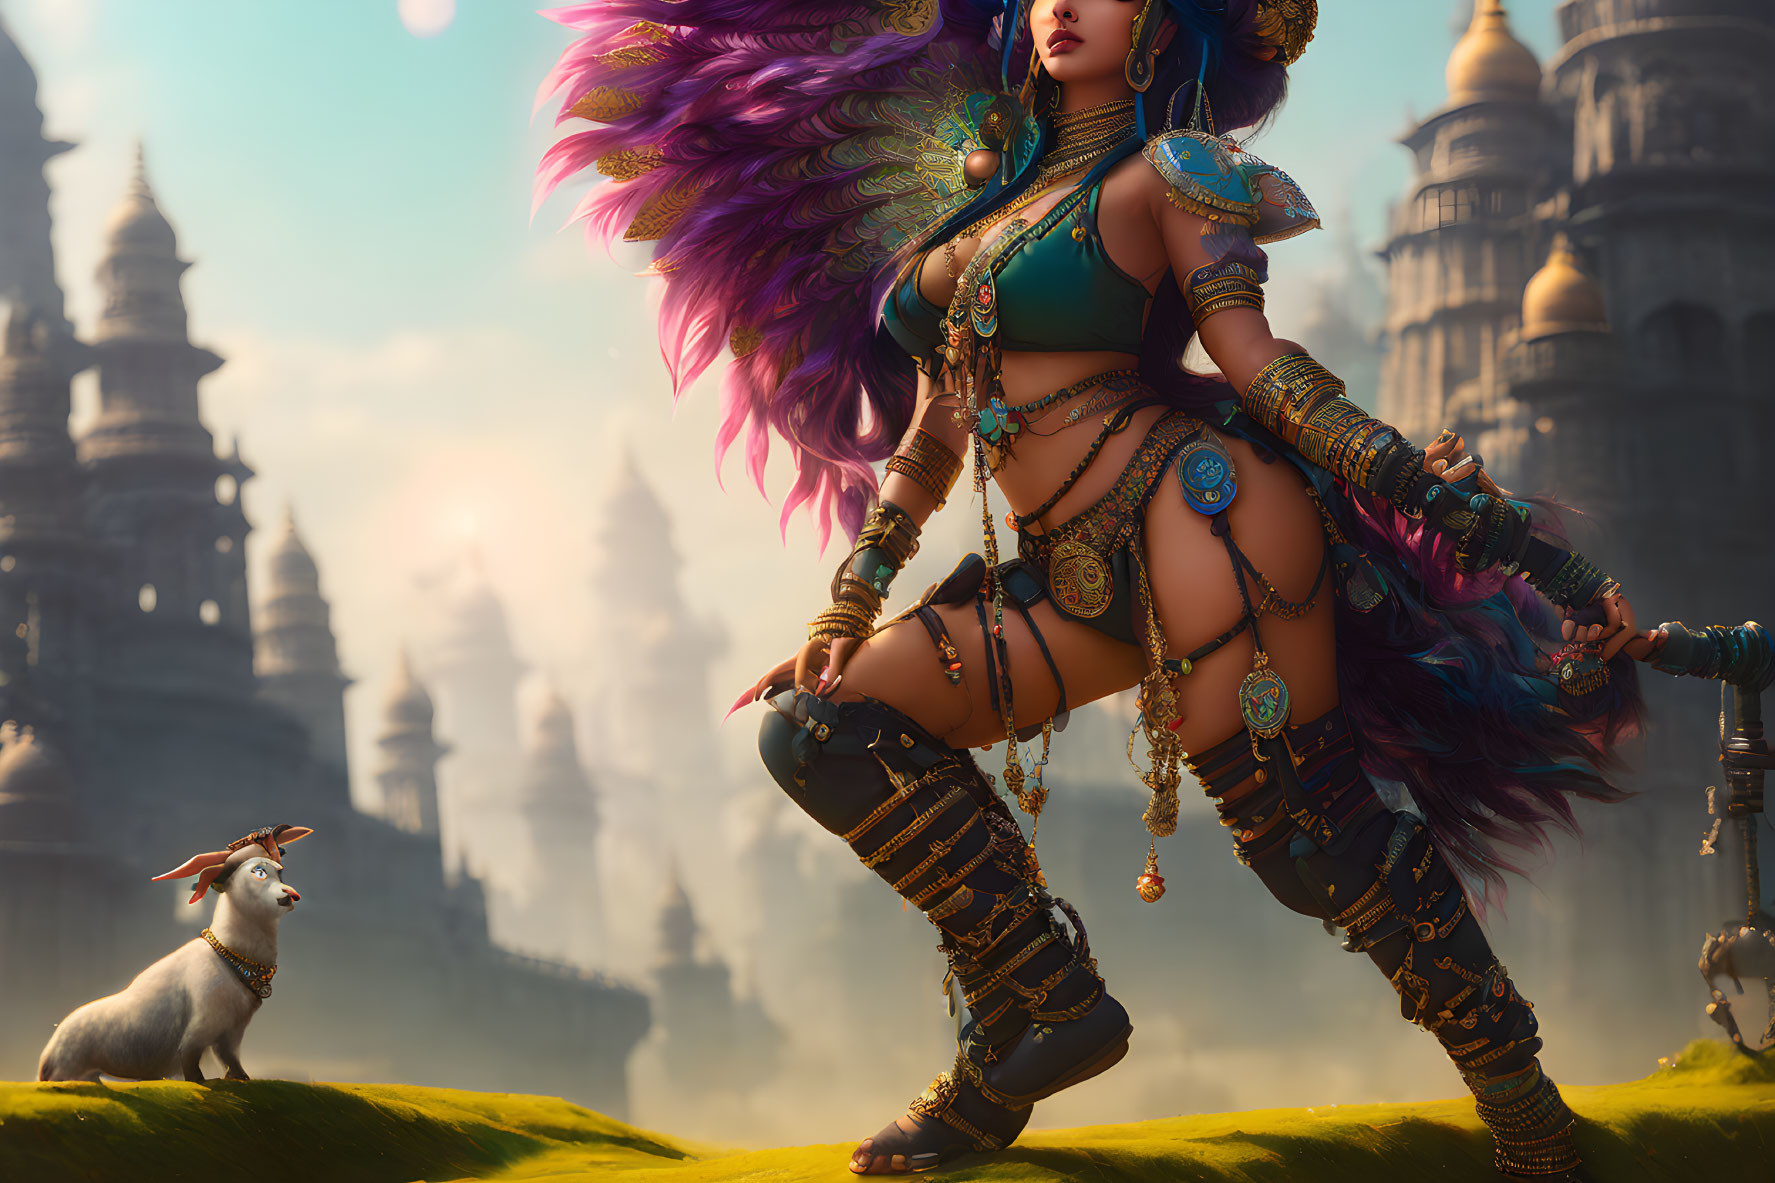 Fantasy warrior woman with intricate armor and feathers in digital artwork